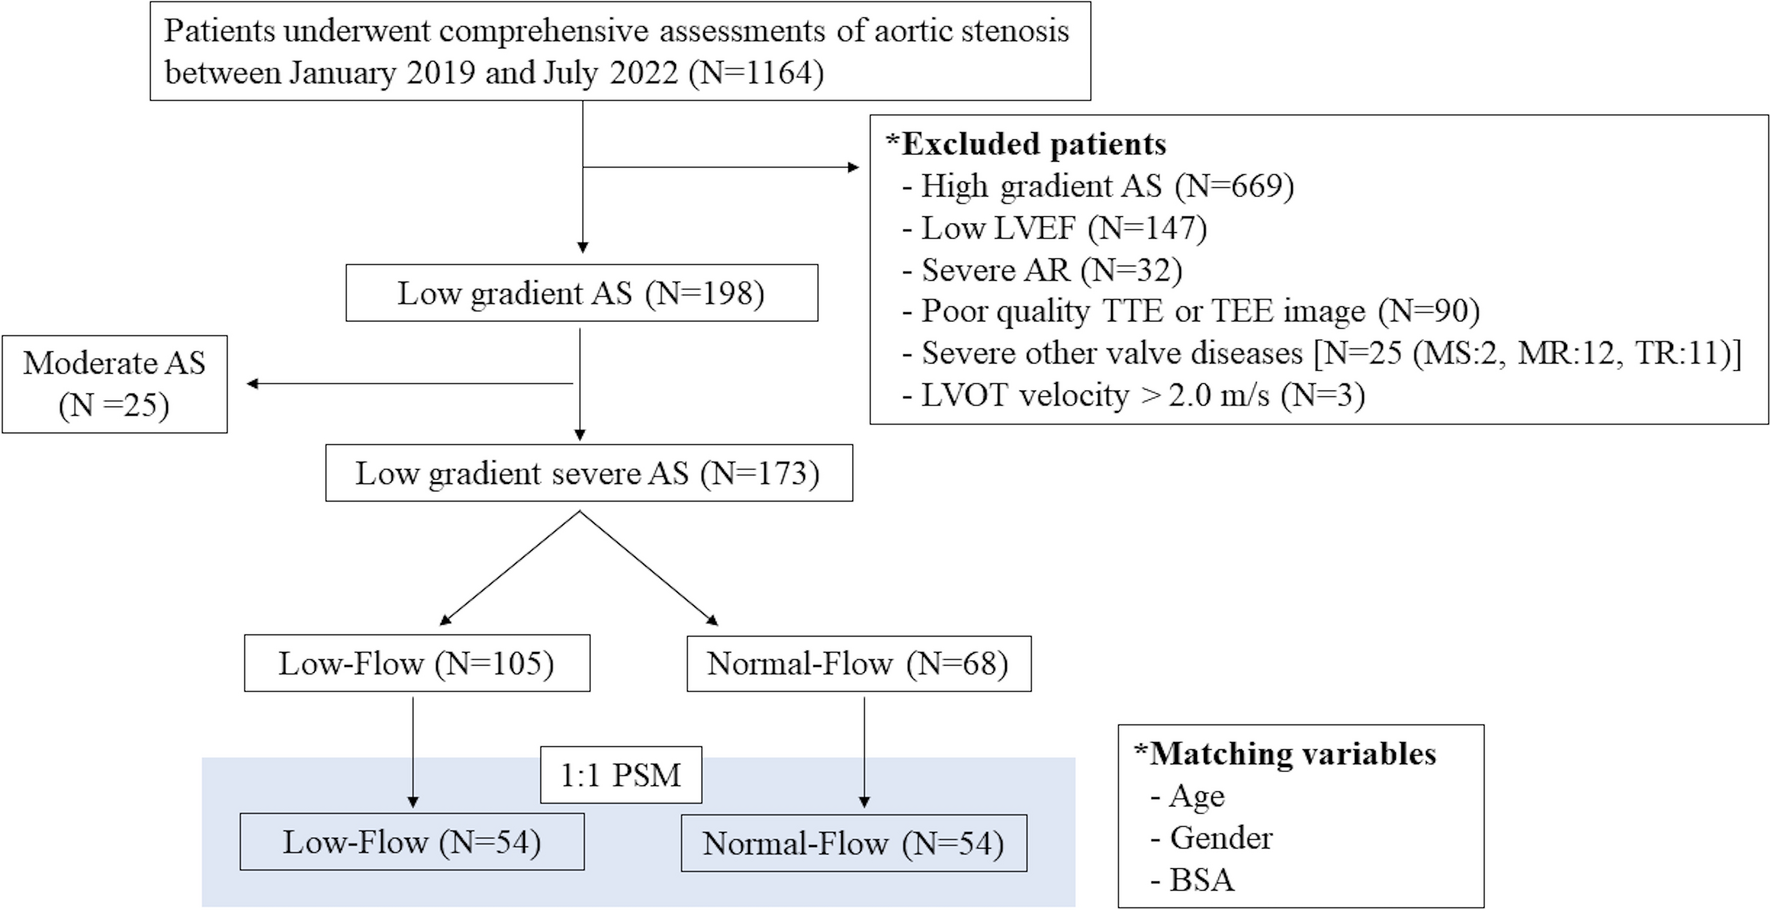 Impact of stroke volume assessment by three-dimensional transesophageal echocardiography on the classification of low-gradient aortic stenosis